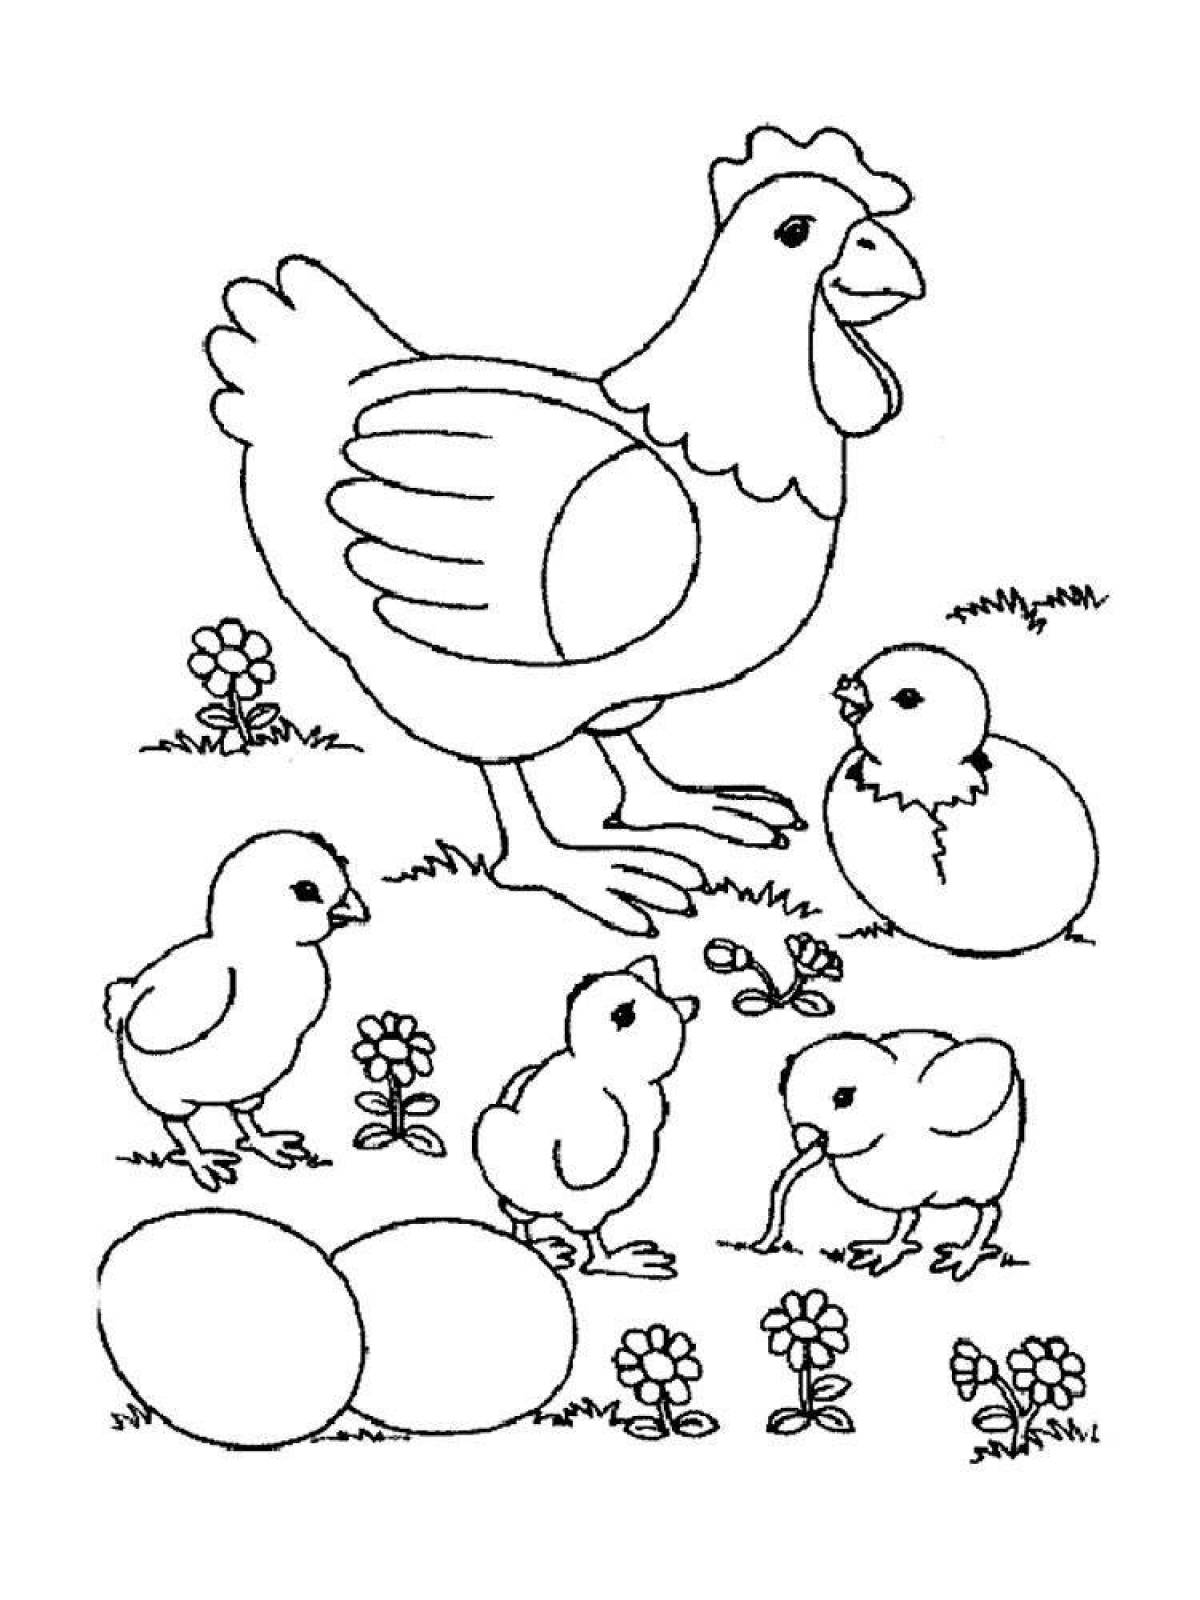 Funny poultry coloring for kids